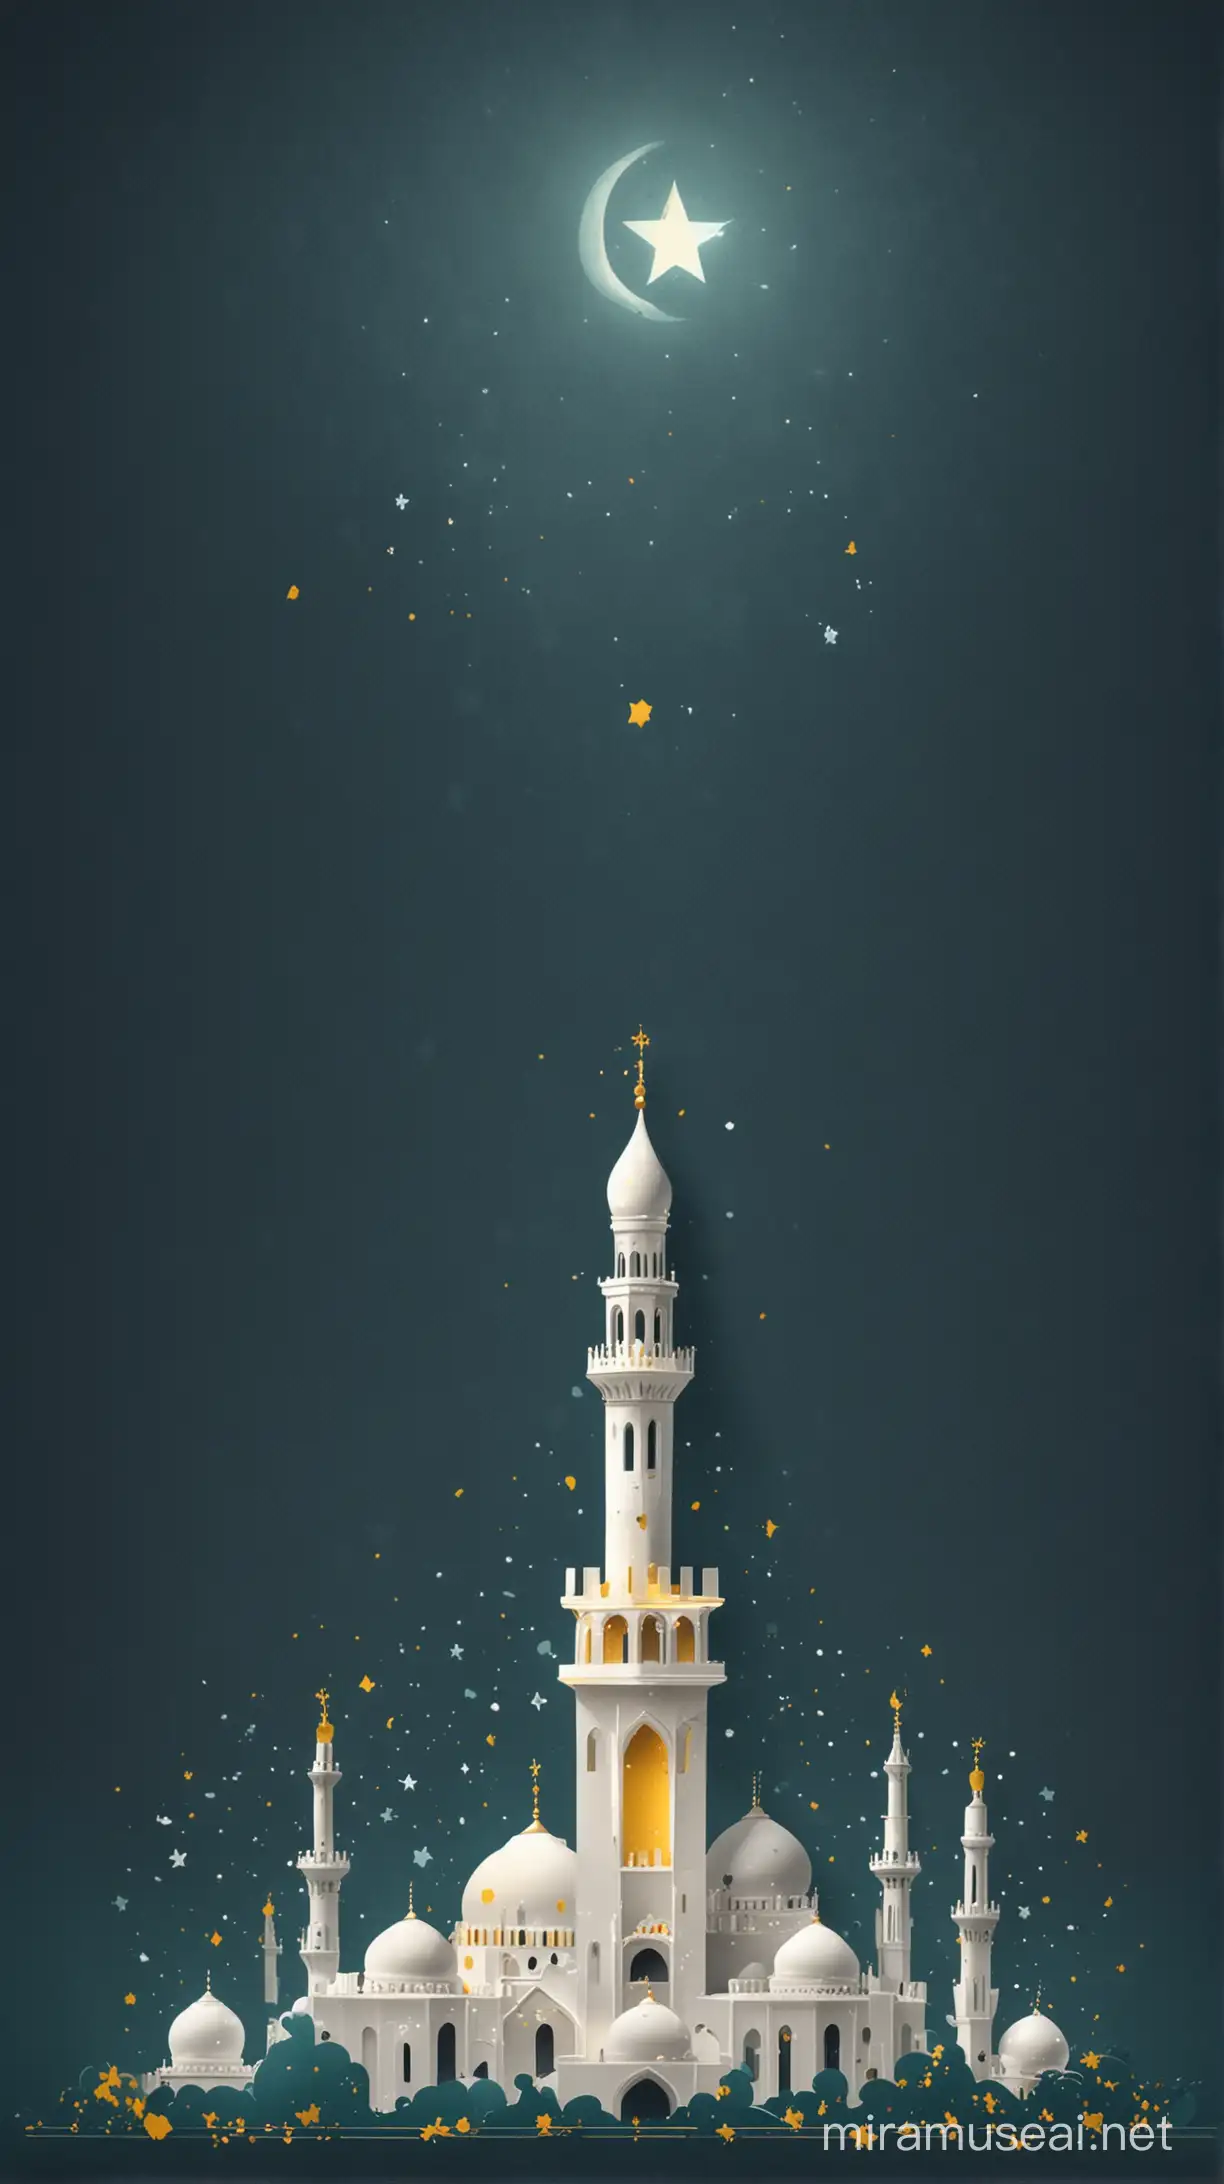 show me an image of a simplified vector mosque, color white, with drop shadow effects, with yellow star sprinkled all over the mosque moderately, dark blue or dark teal green simplified background, with lantern at the upper right corner, glowing, with the ratio of 750 x 1334 px, the purpose of this image is for company seasons greetings